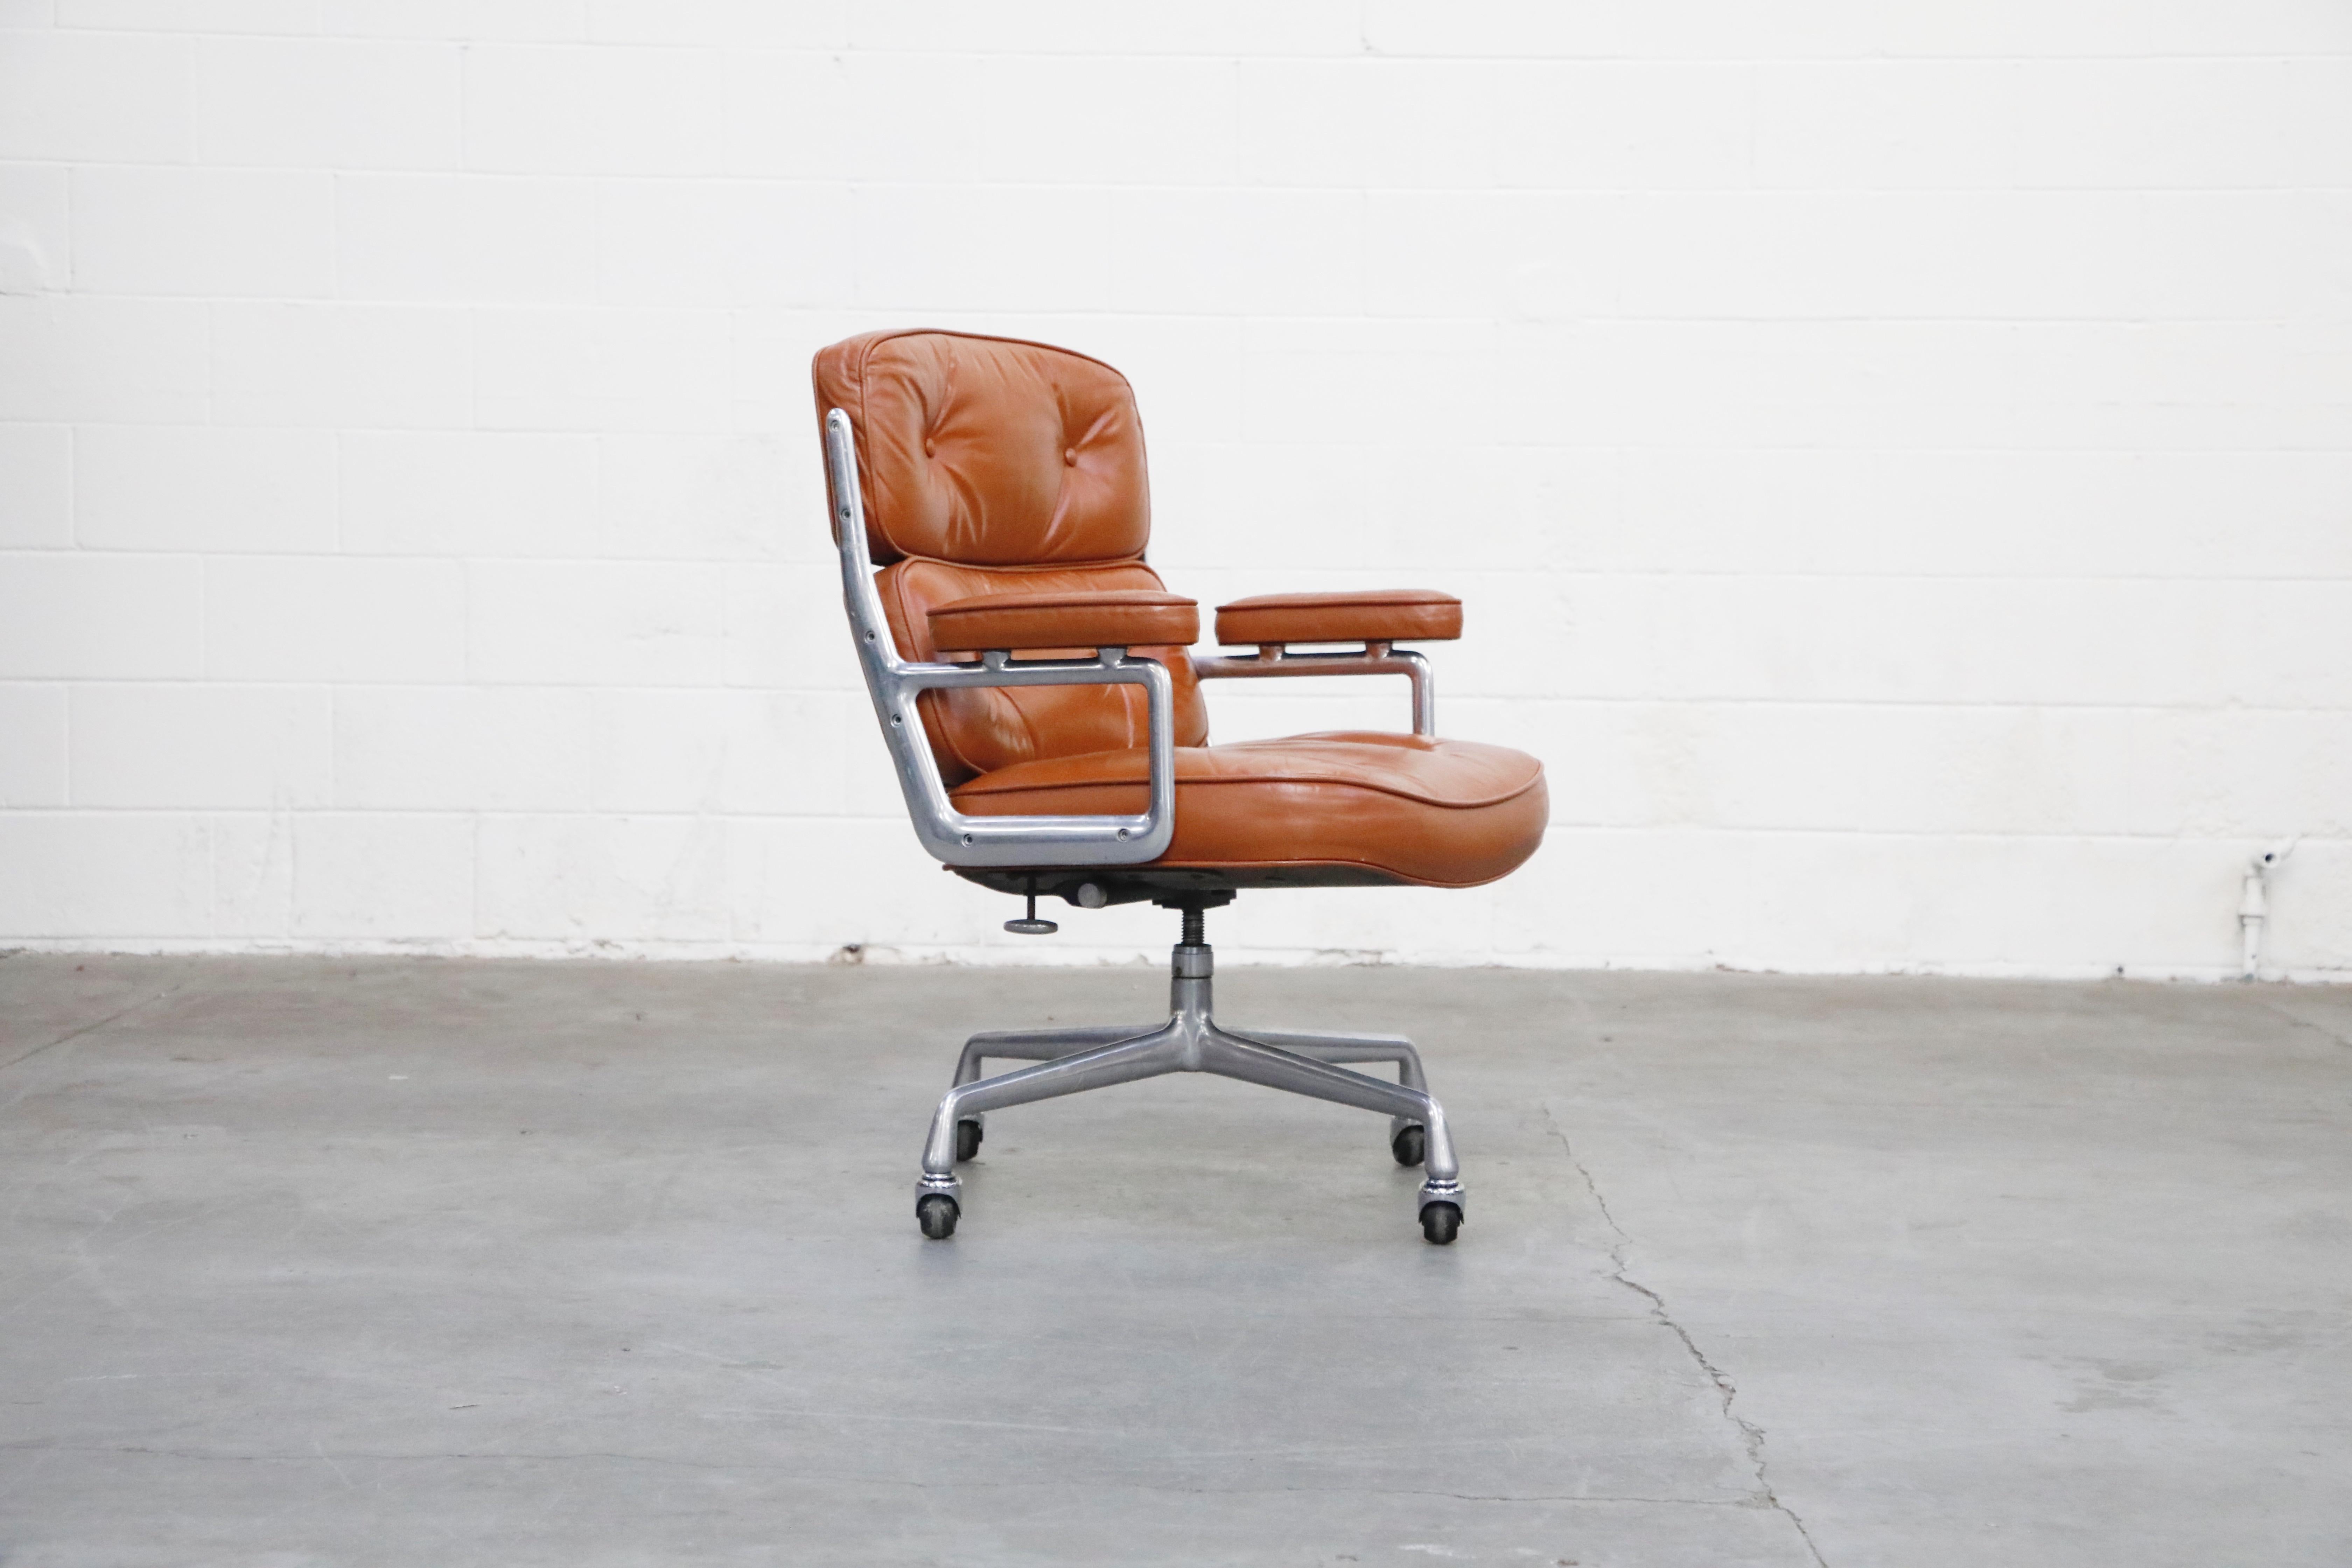 These incredible cognac brown leather 'Time Life' executive desk chairs were designed by Charles and Ray Eames in 1959 and manufactured by Herman Miller. These comfortable and ergonomic executive chairs feature their original cognac brown colored